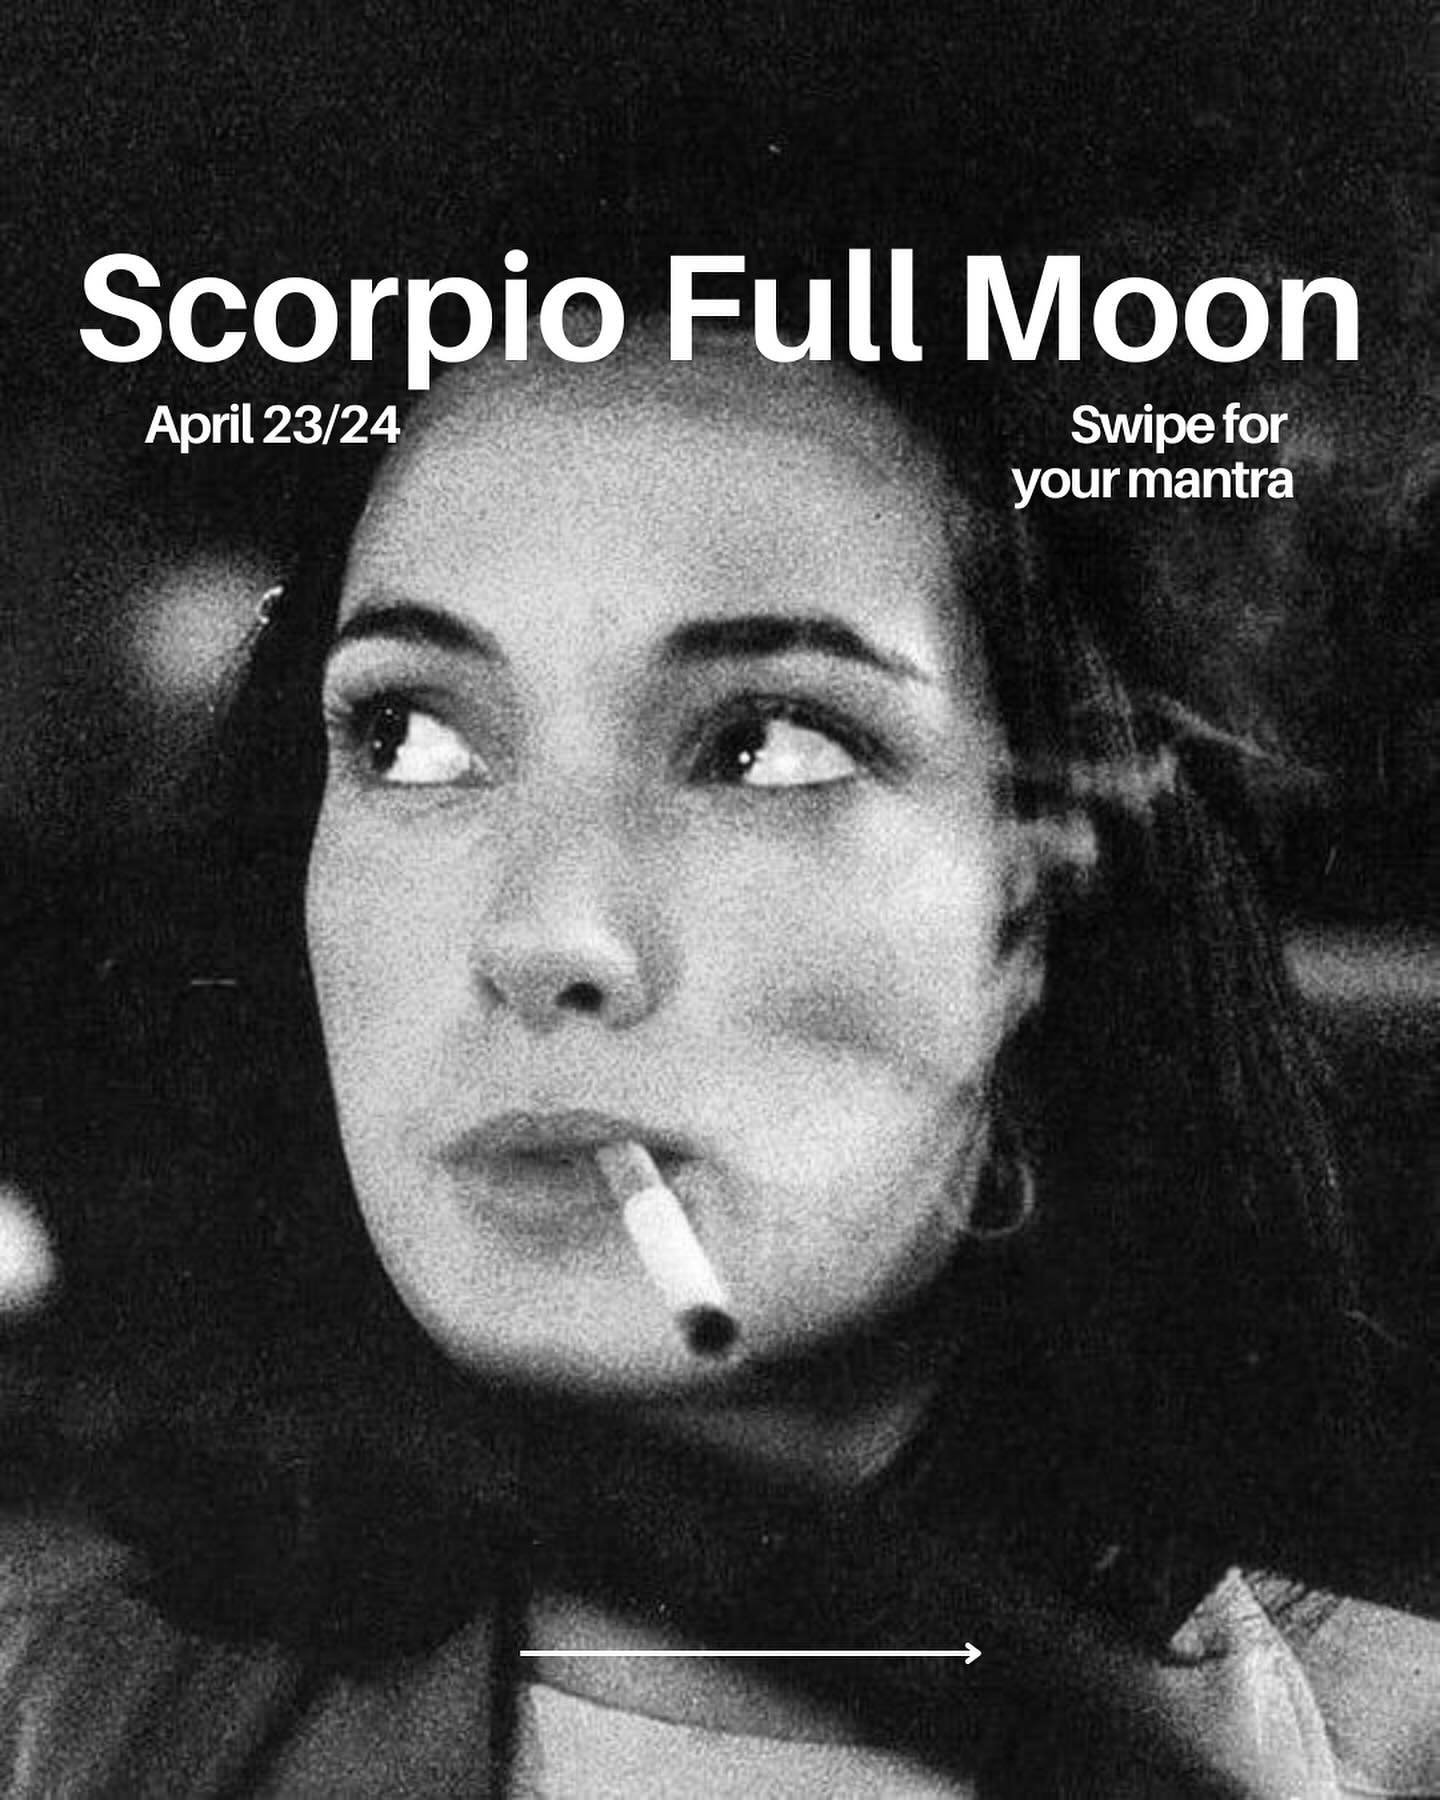 The iconic scorpio 🦂🖤 

Check the house you have Scorpio in for more details as to where you will feel it most. Those that have planets in early degrees of fixed signs (Scorpio, Aquarius, Taurus, Leo) will feel it most.

My sun is in Aquarius at 6 